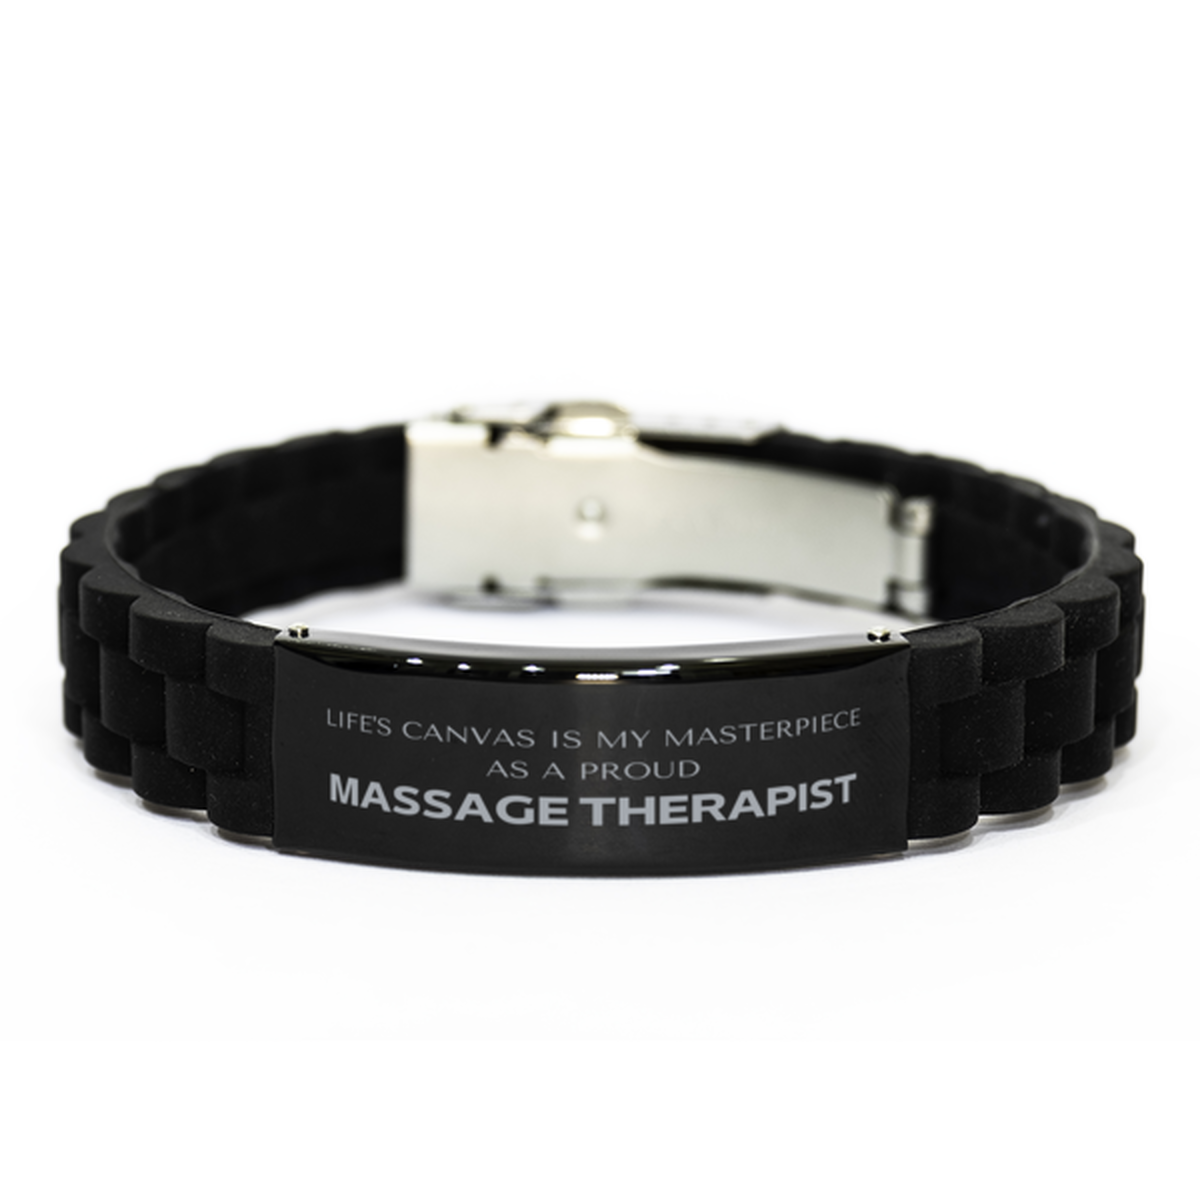 Proud Massage Therapist Gifts, Life's canvas is my masterpiece, Epic Birthday Christmas Unique Black Glidelock Clasp Bracelet For Massage Therapist, Coworkers, Men, Women, Friends